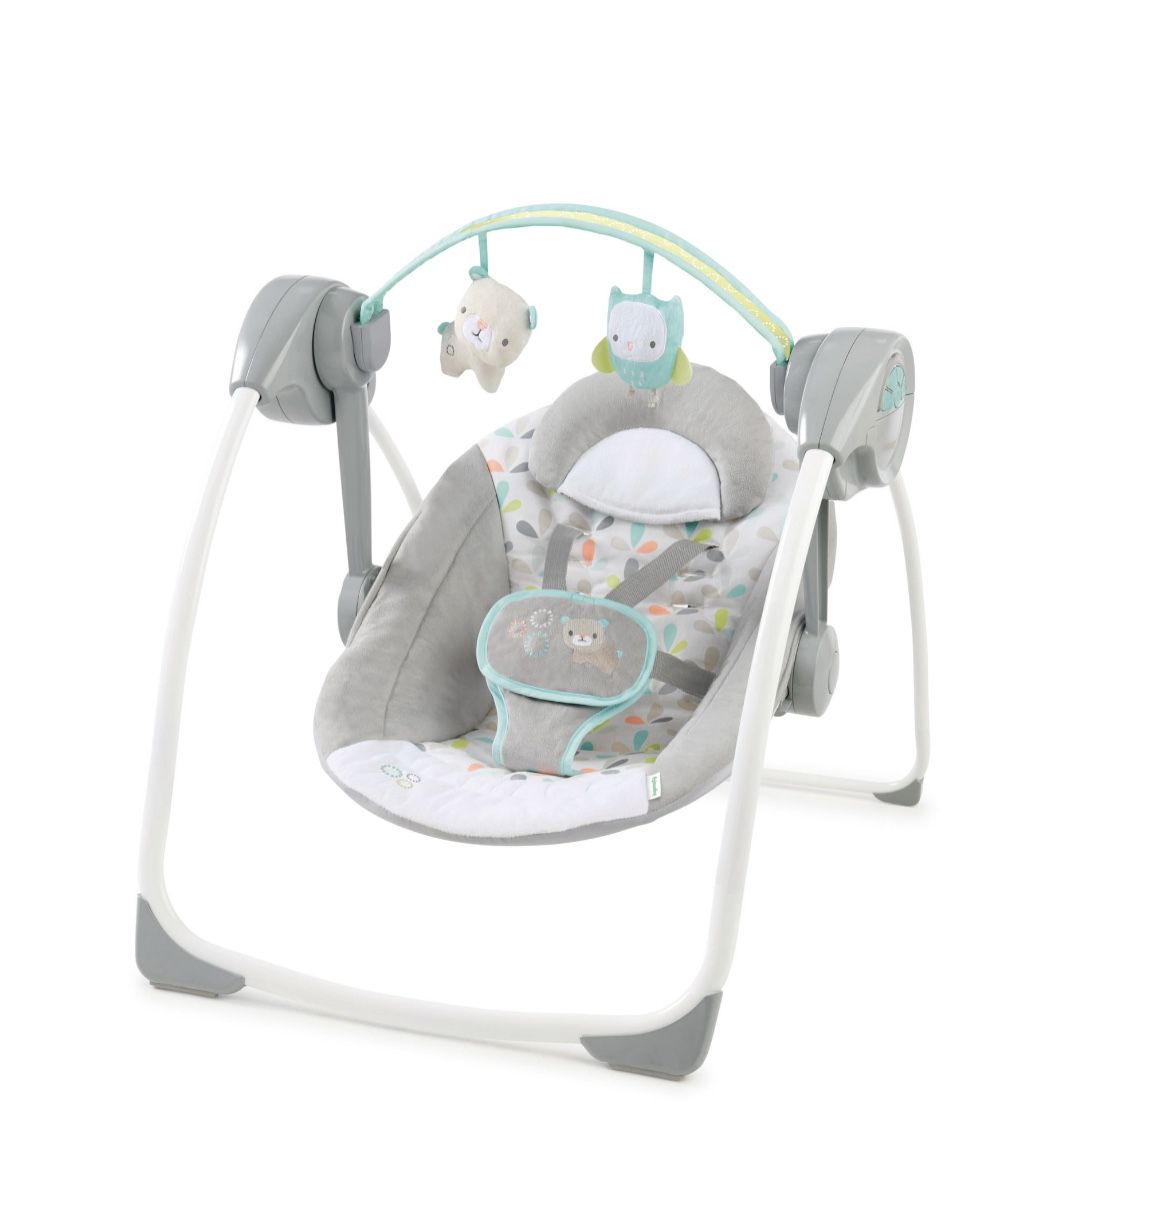 Portable Baby Swing (Ingenuity Soothe 'n Delight Portable Baby Swing with Music, Gray.)